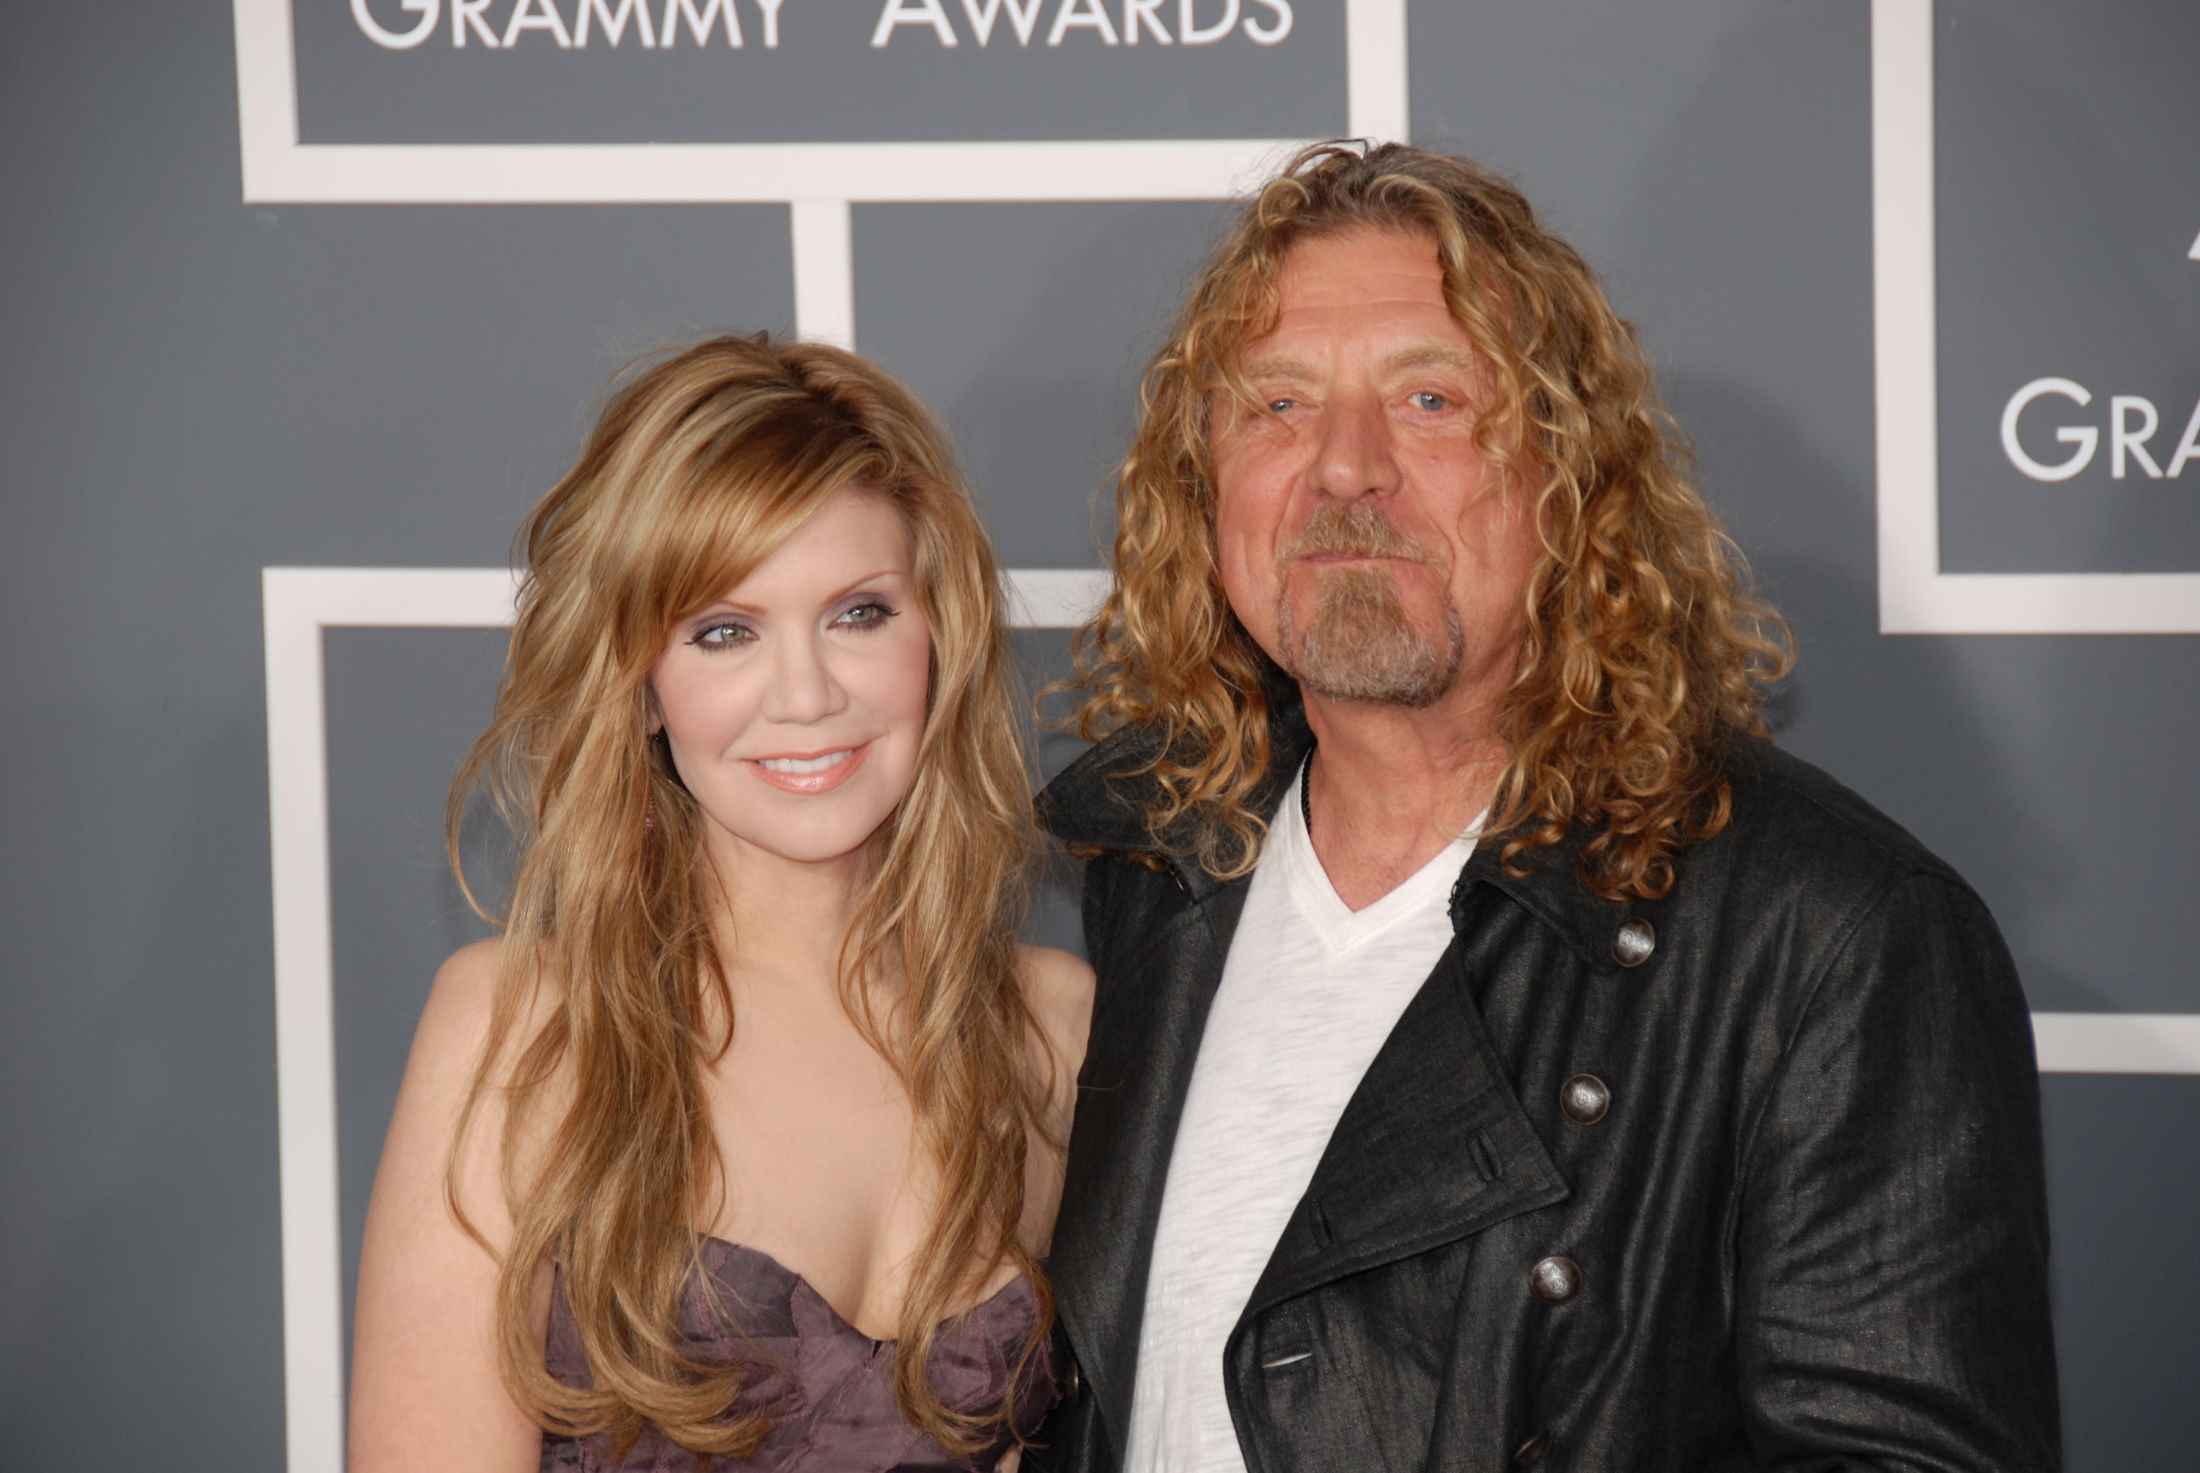 Robert Plant And Alison Krauss Reunite for Another Album Bloomberg